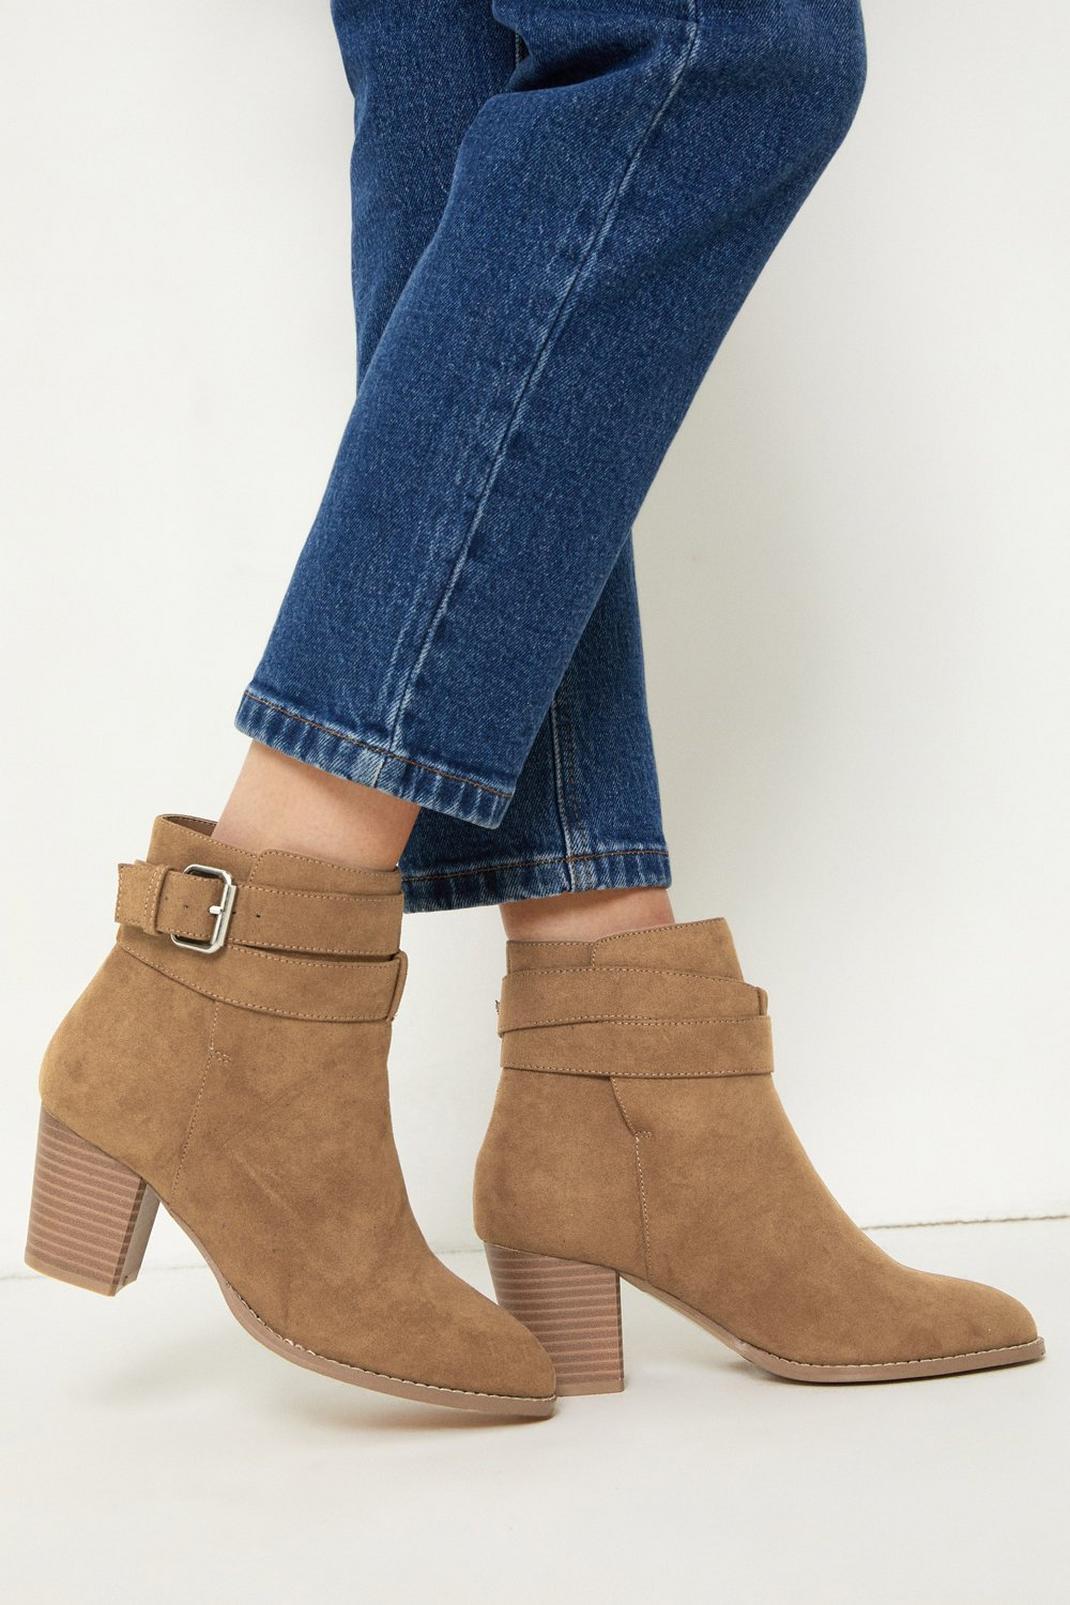 Tan Autumn Cross Strapped Heeled Ankle Boots image number 1